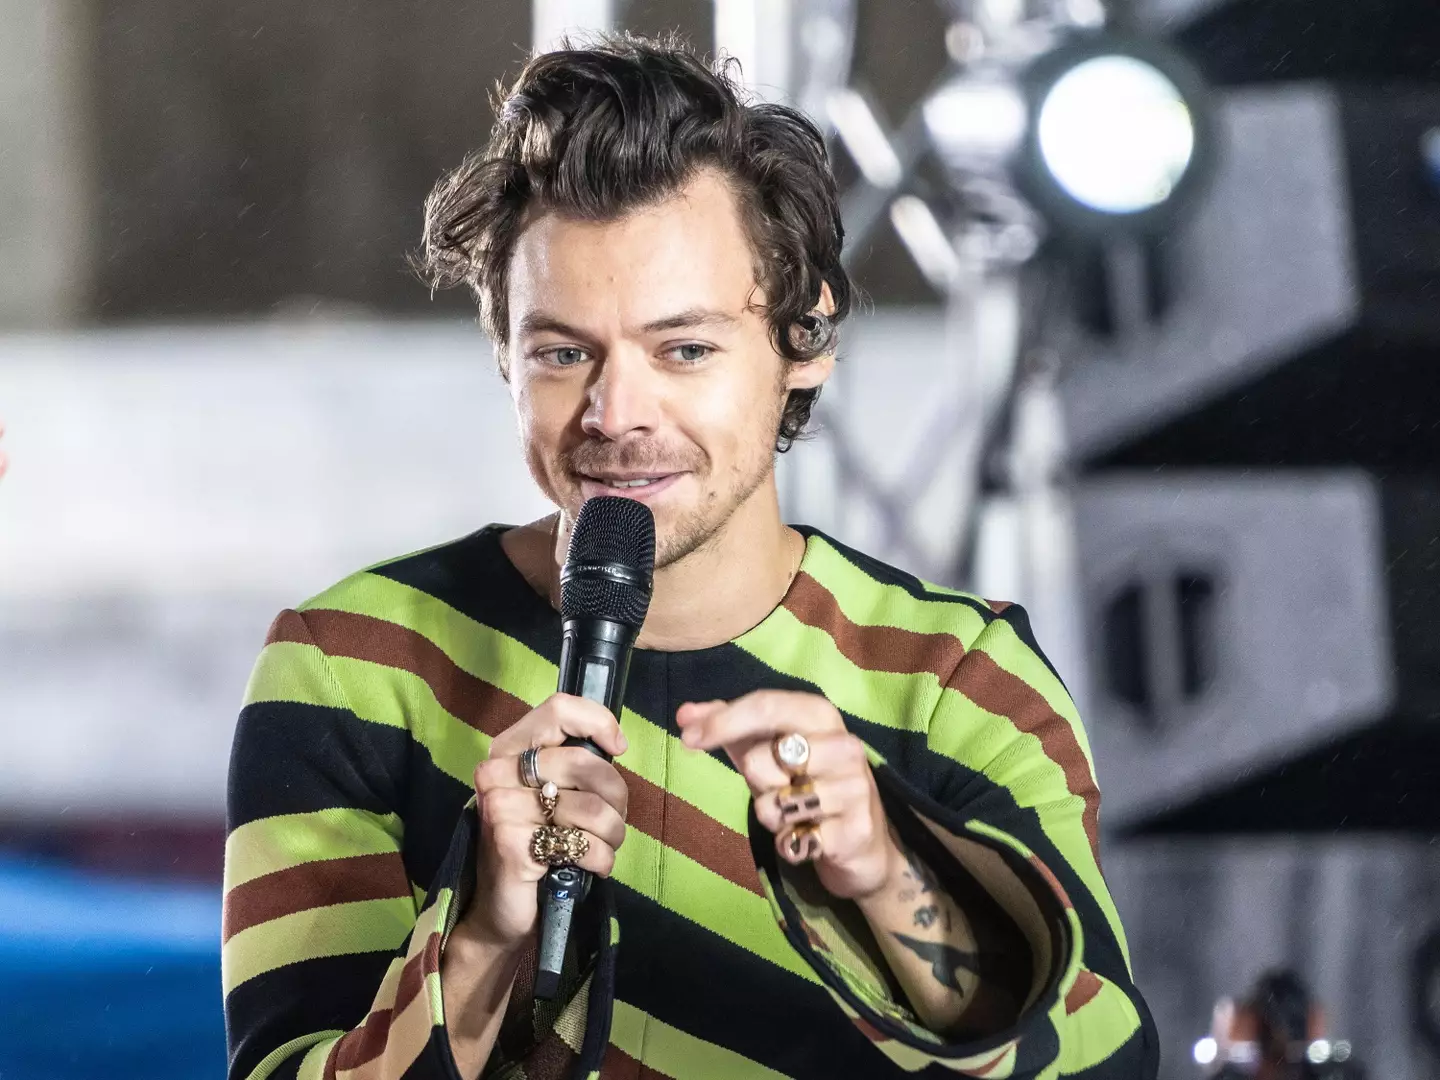 Harry Styles got a Skittle to the eye this week.